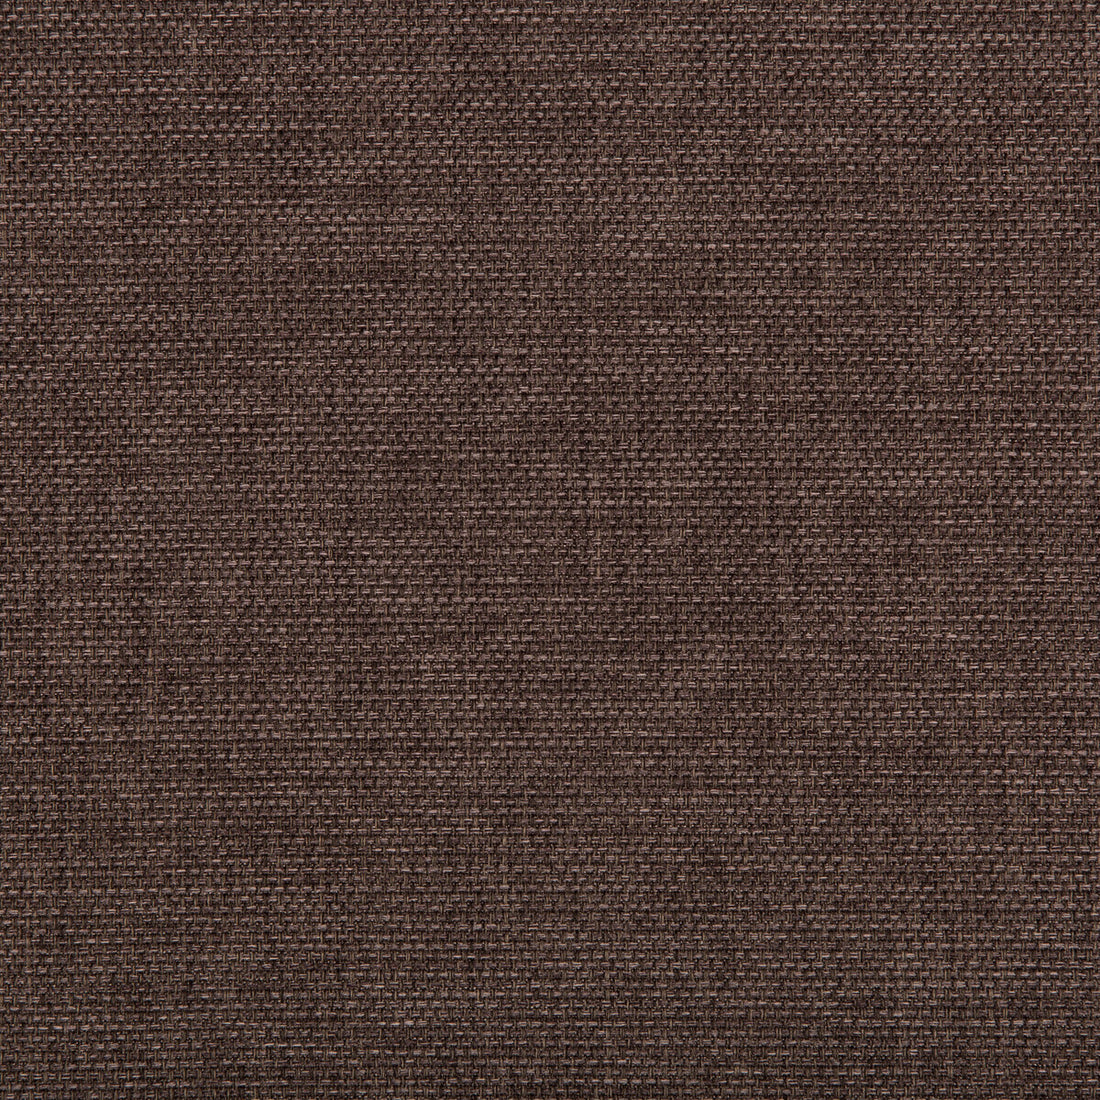 Kravet Contract fabric in 4645-6 color - pattern 4645.6.0 - by Kravet Contract